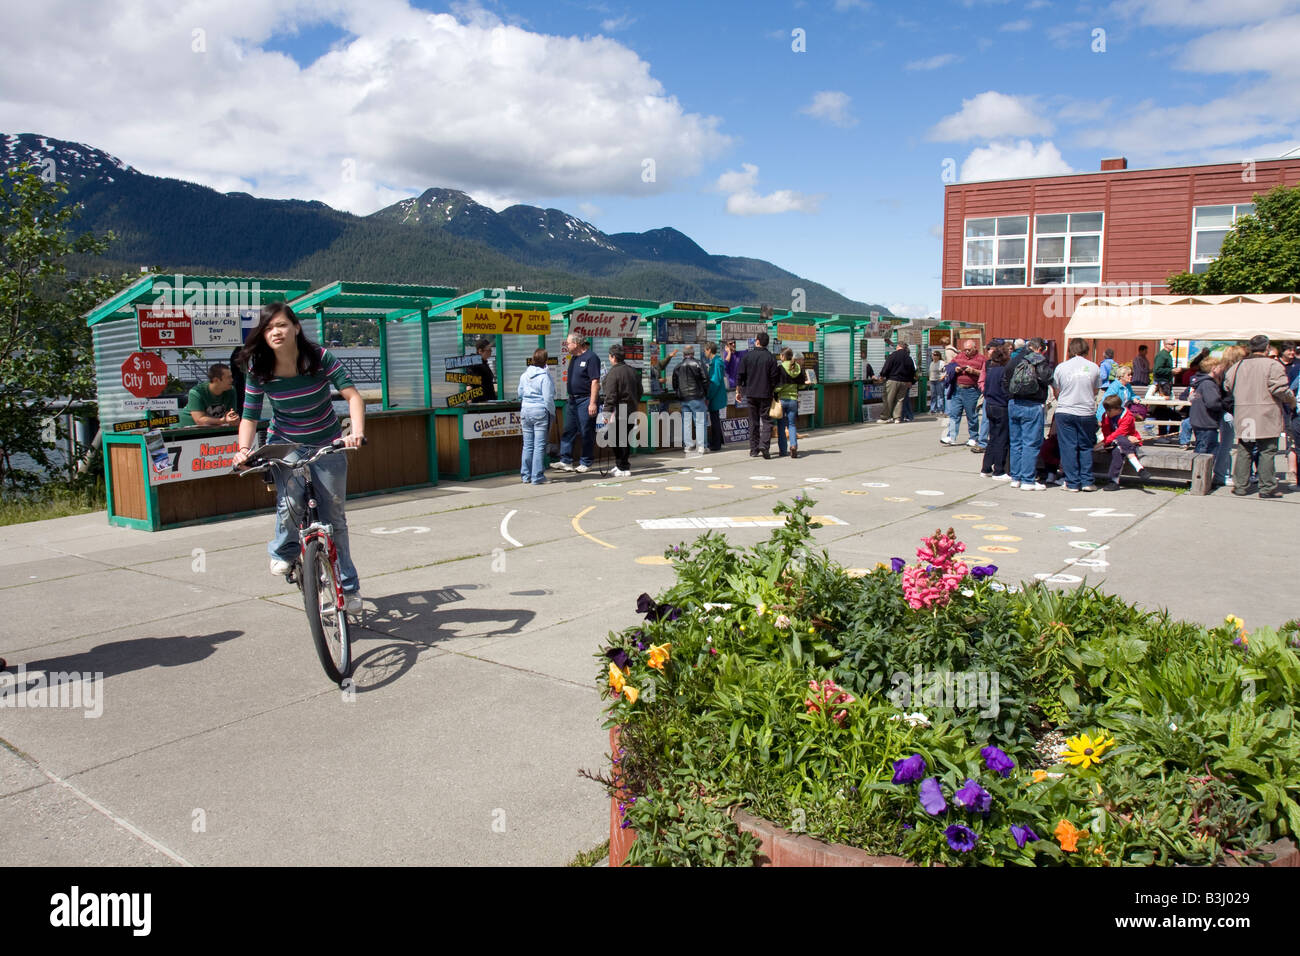 Stalls / booths where daytrips are sold to tourist on the square near Mt Roberts Tram, Juneau, Alaska Stock Photo